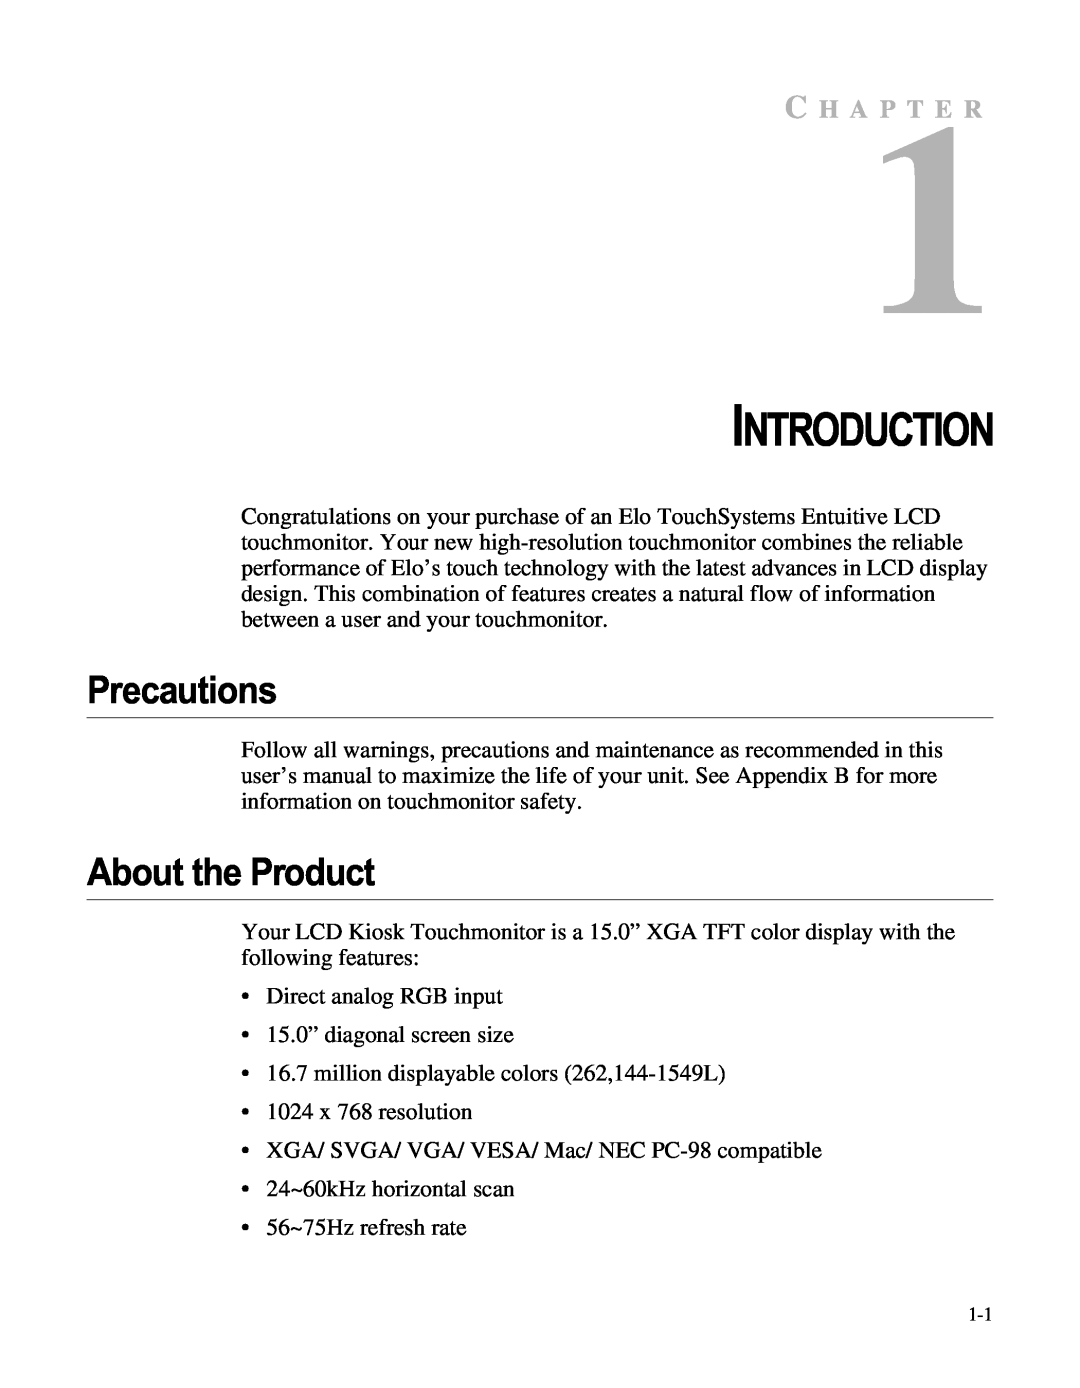 Elo TouchSystems LCD manual Introduction, Precautions, About the Product, C H A P T E R 